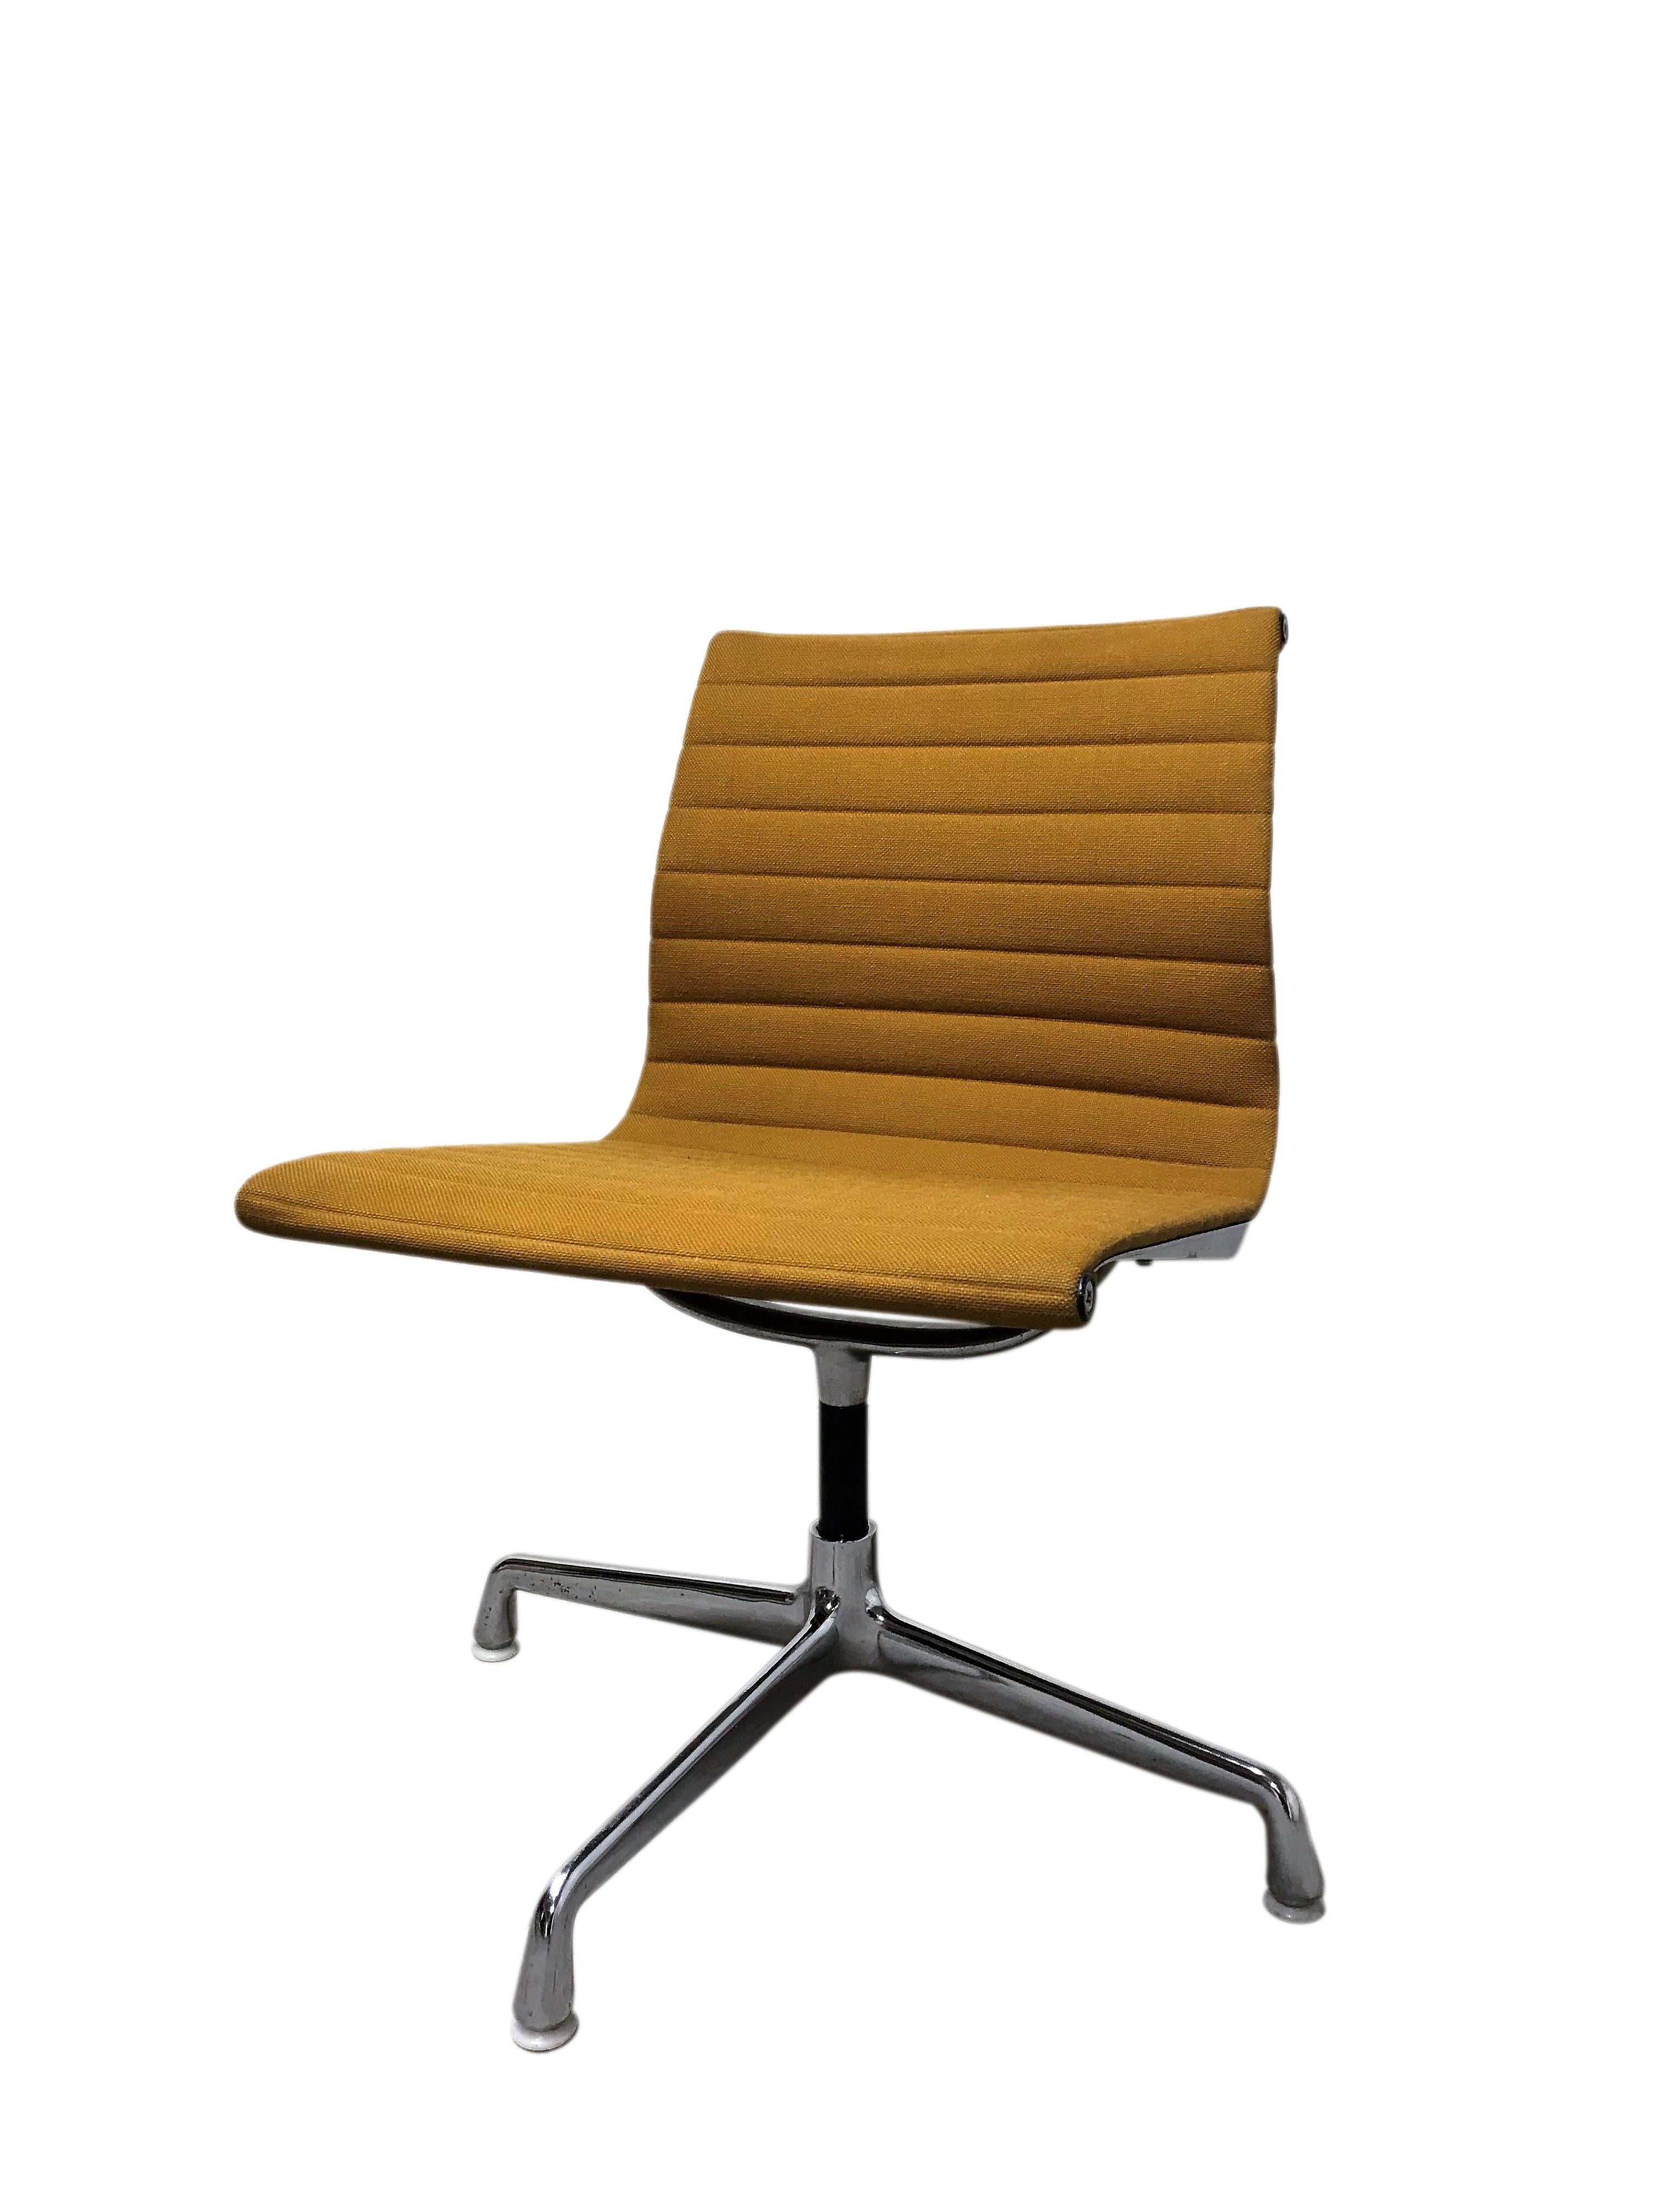 American Vintage Eames Desk Chair EA108 for Herman Miller, Yellow, 1970s